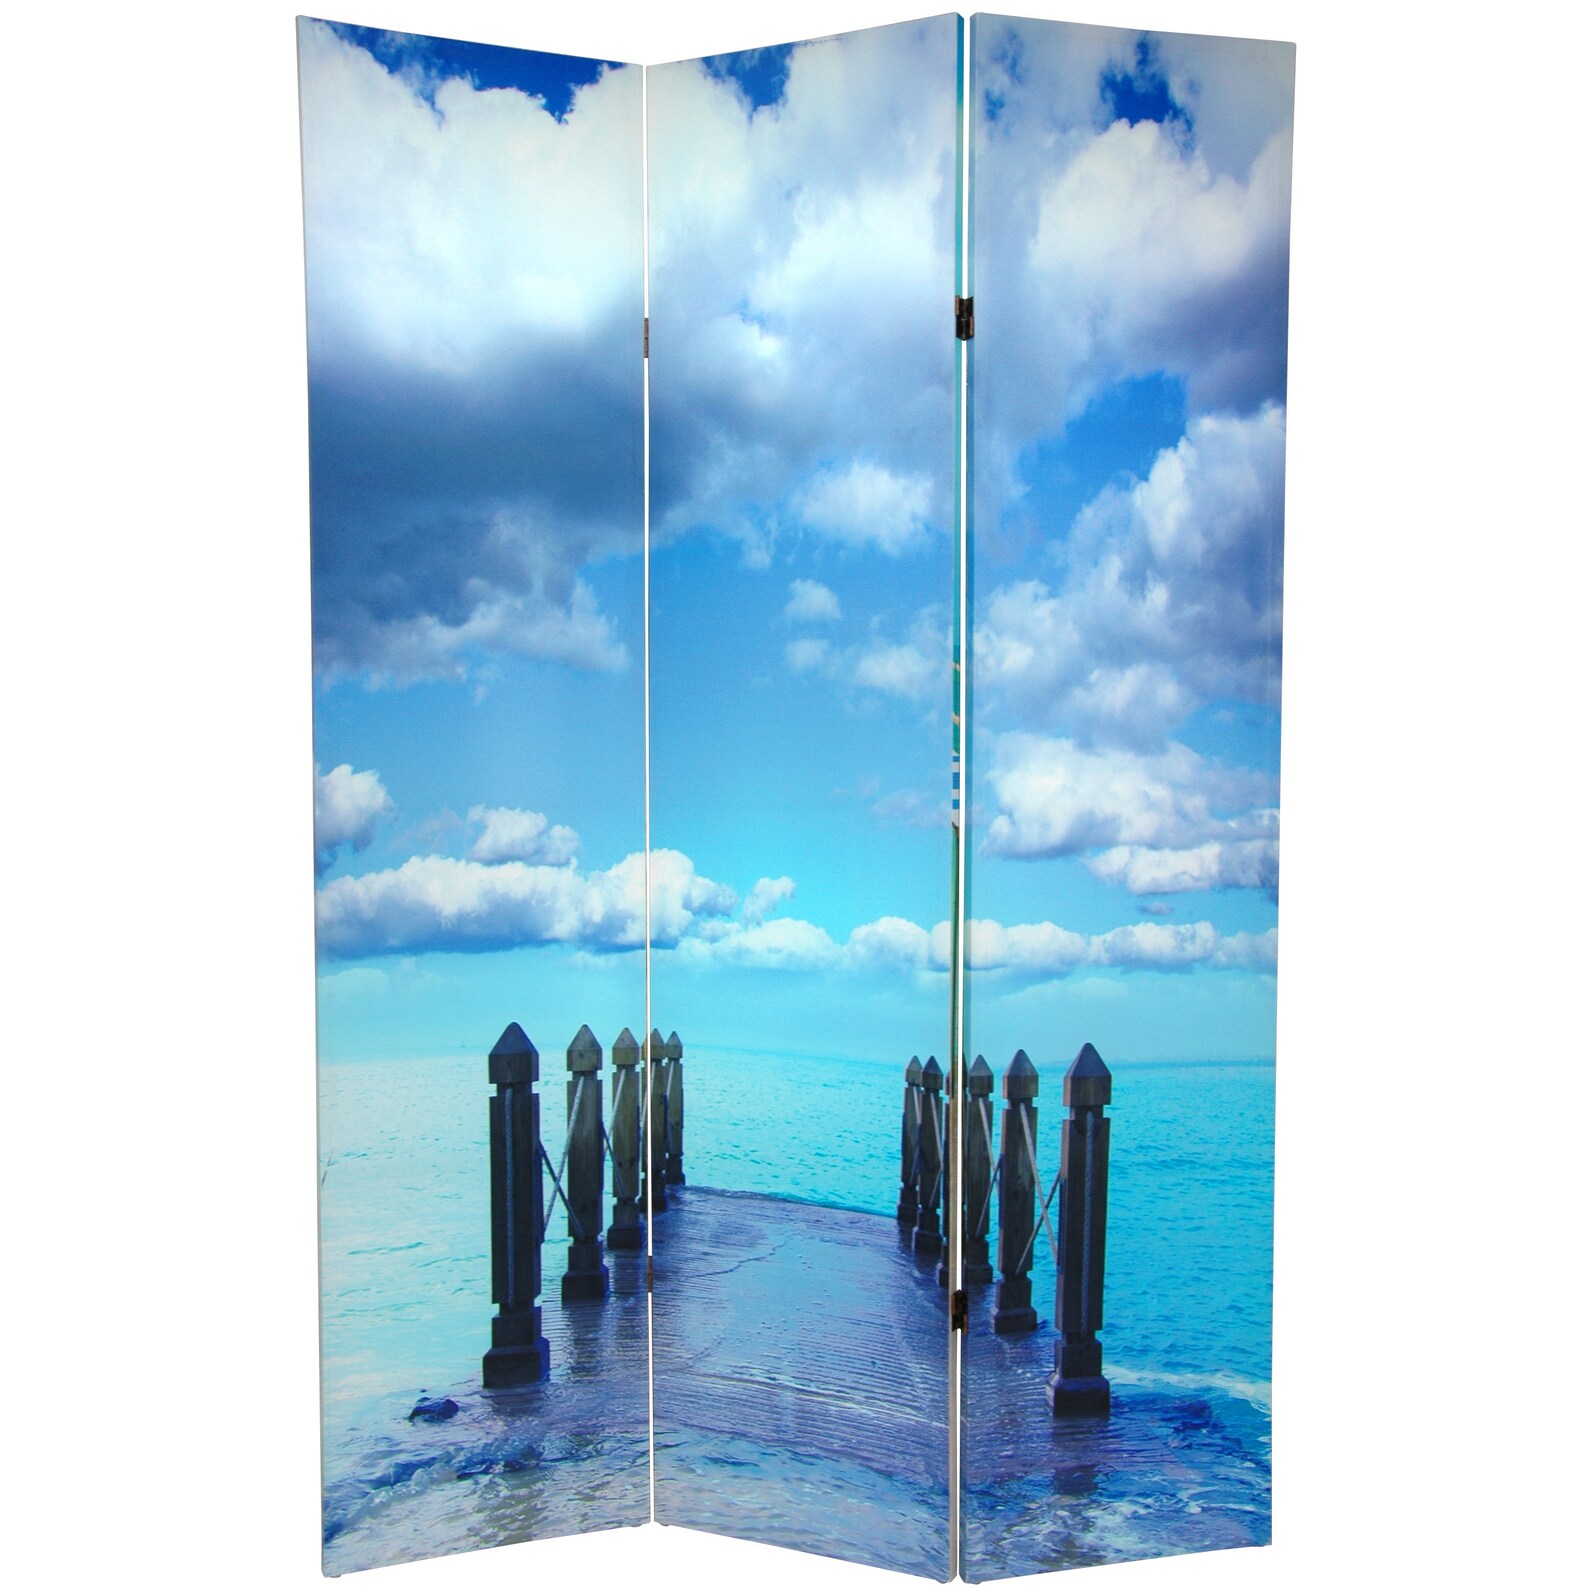 6 Ft. Tall Double Sided Ocean Room Divider - Etsy